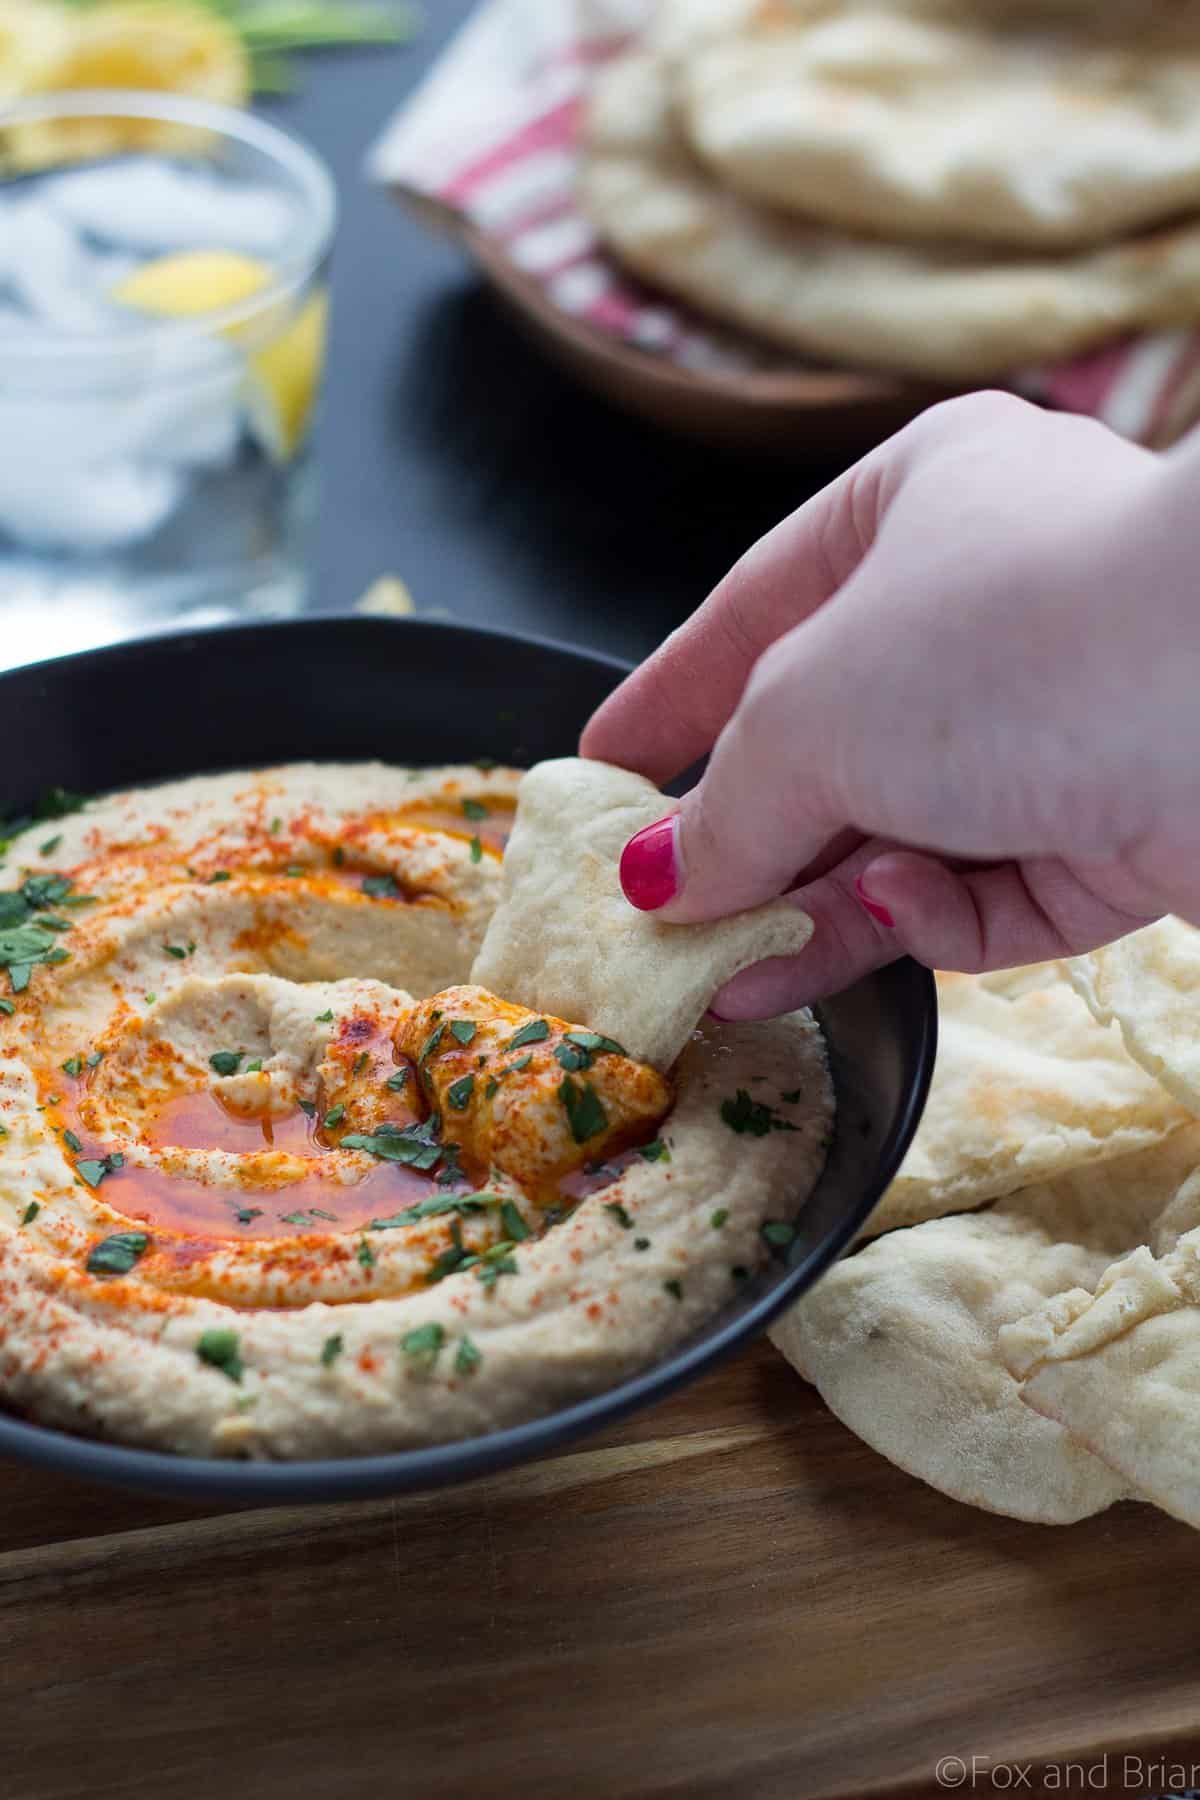 This easy homemade hummus can be made in about 5 minutes and tastes amazing!